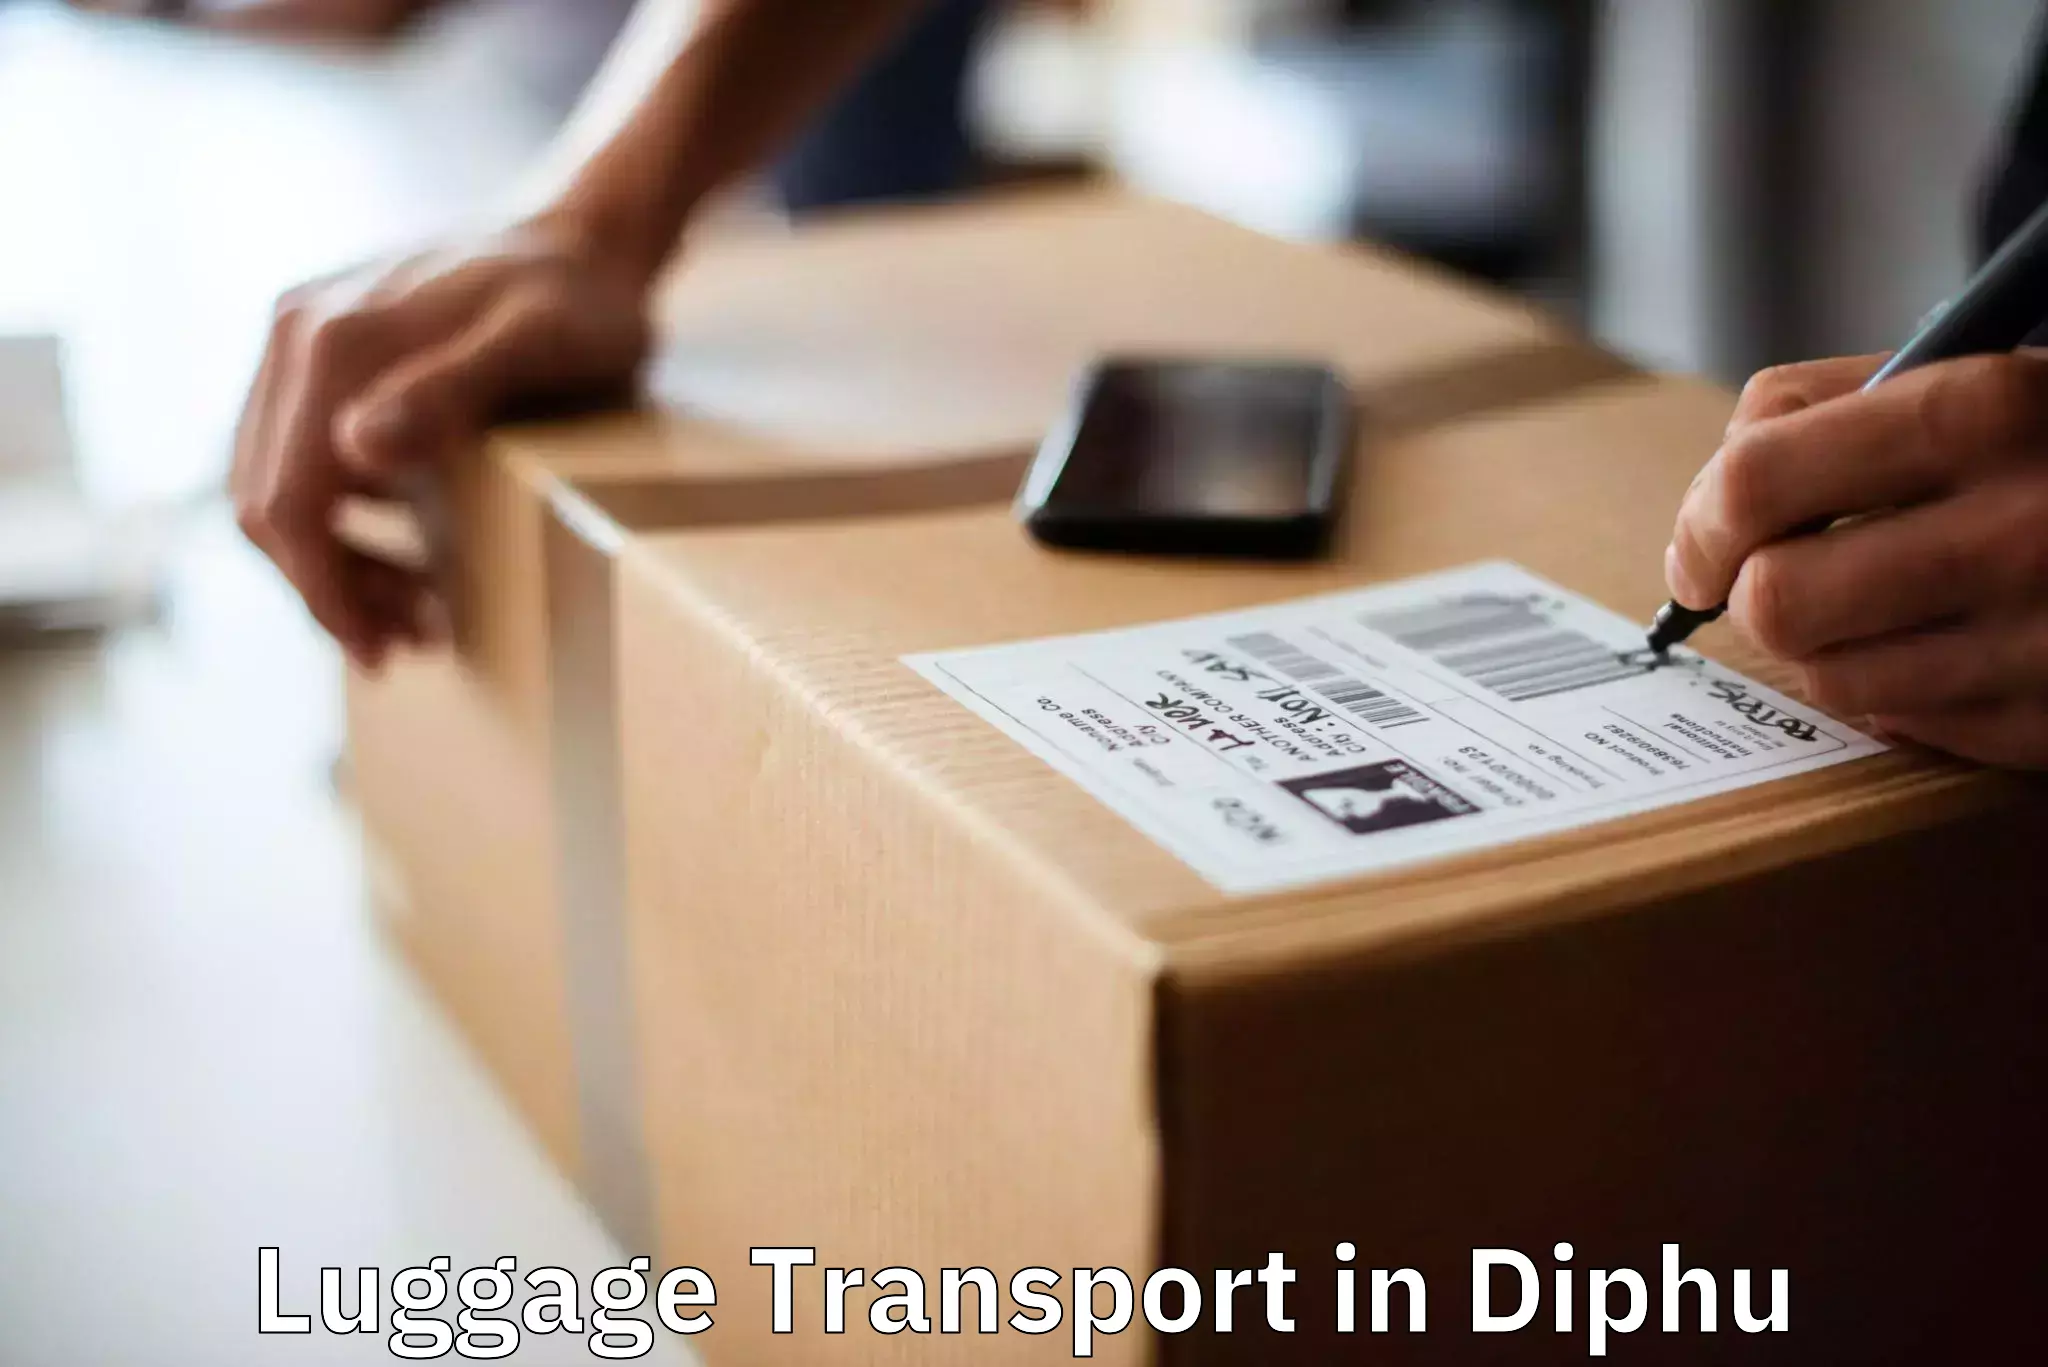 Luggage shipping trends in Diphu